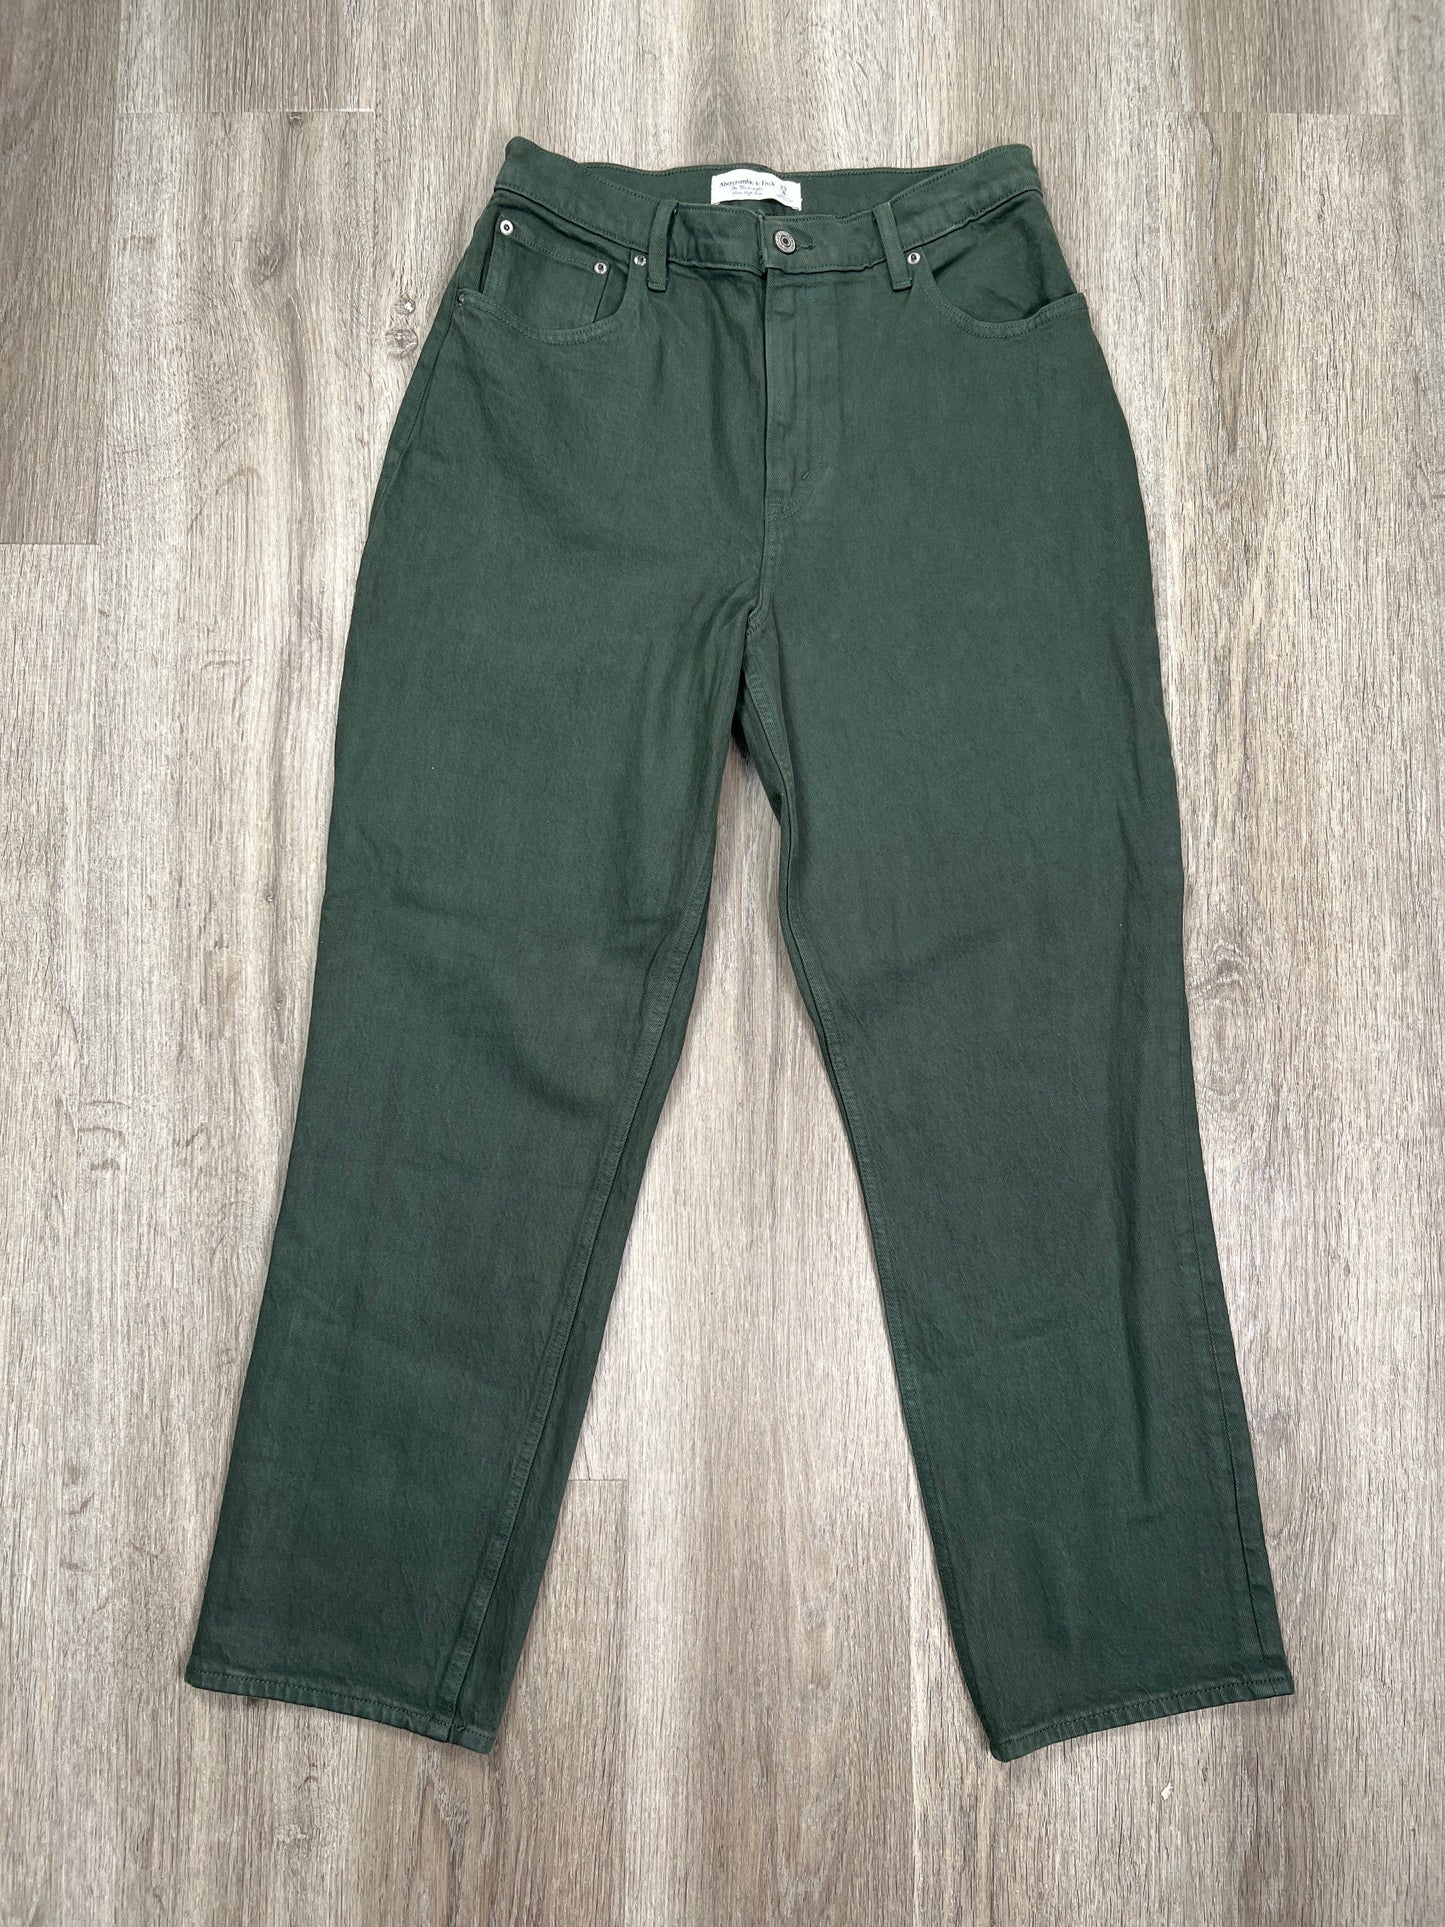 Green Denim Jeans Straight Abercrombie And Fitch, Size 8